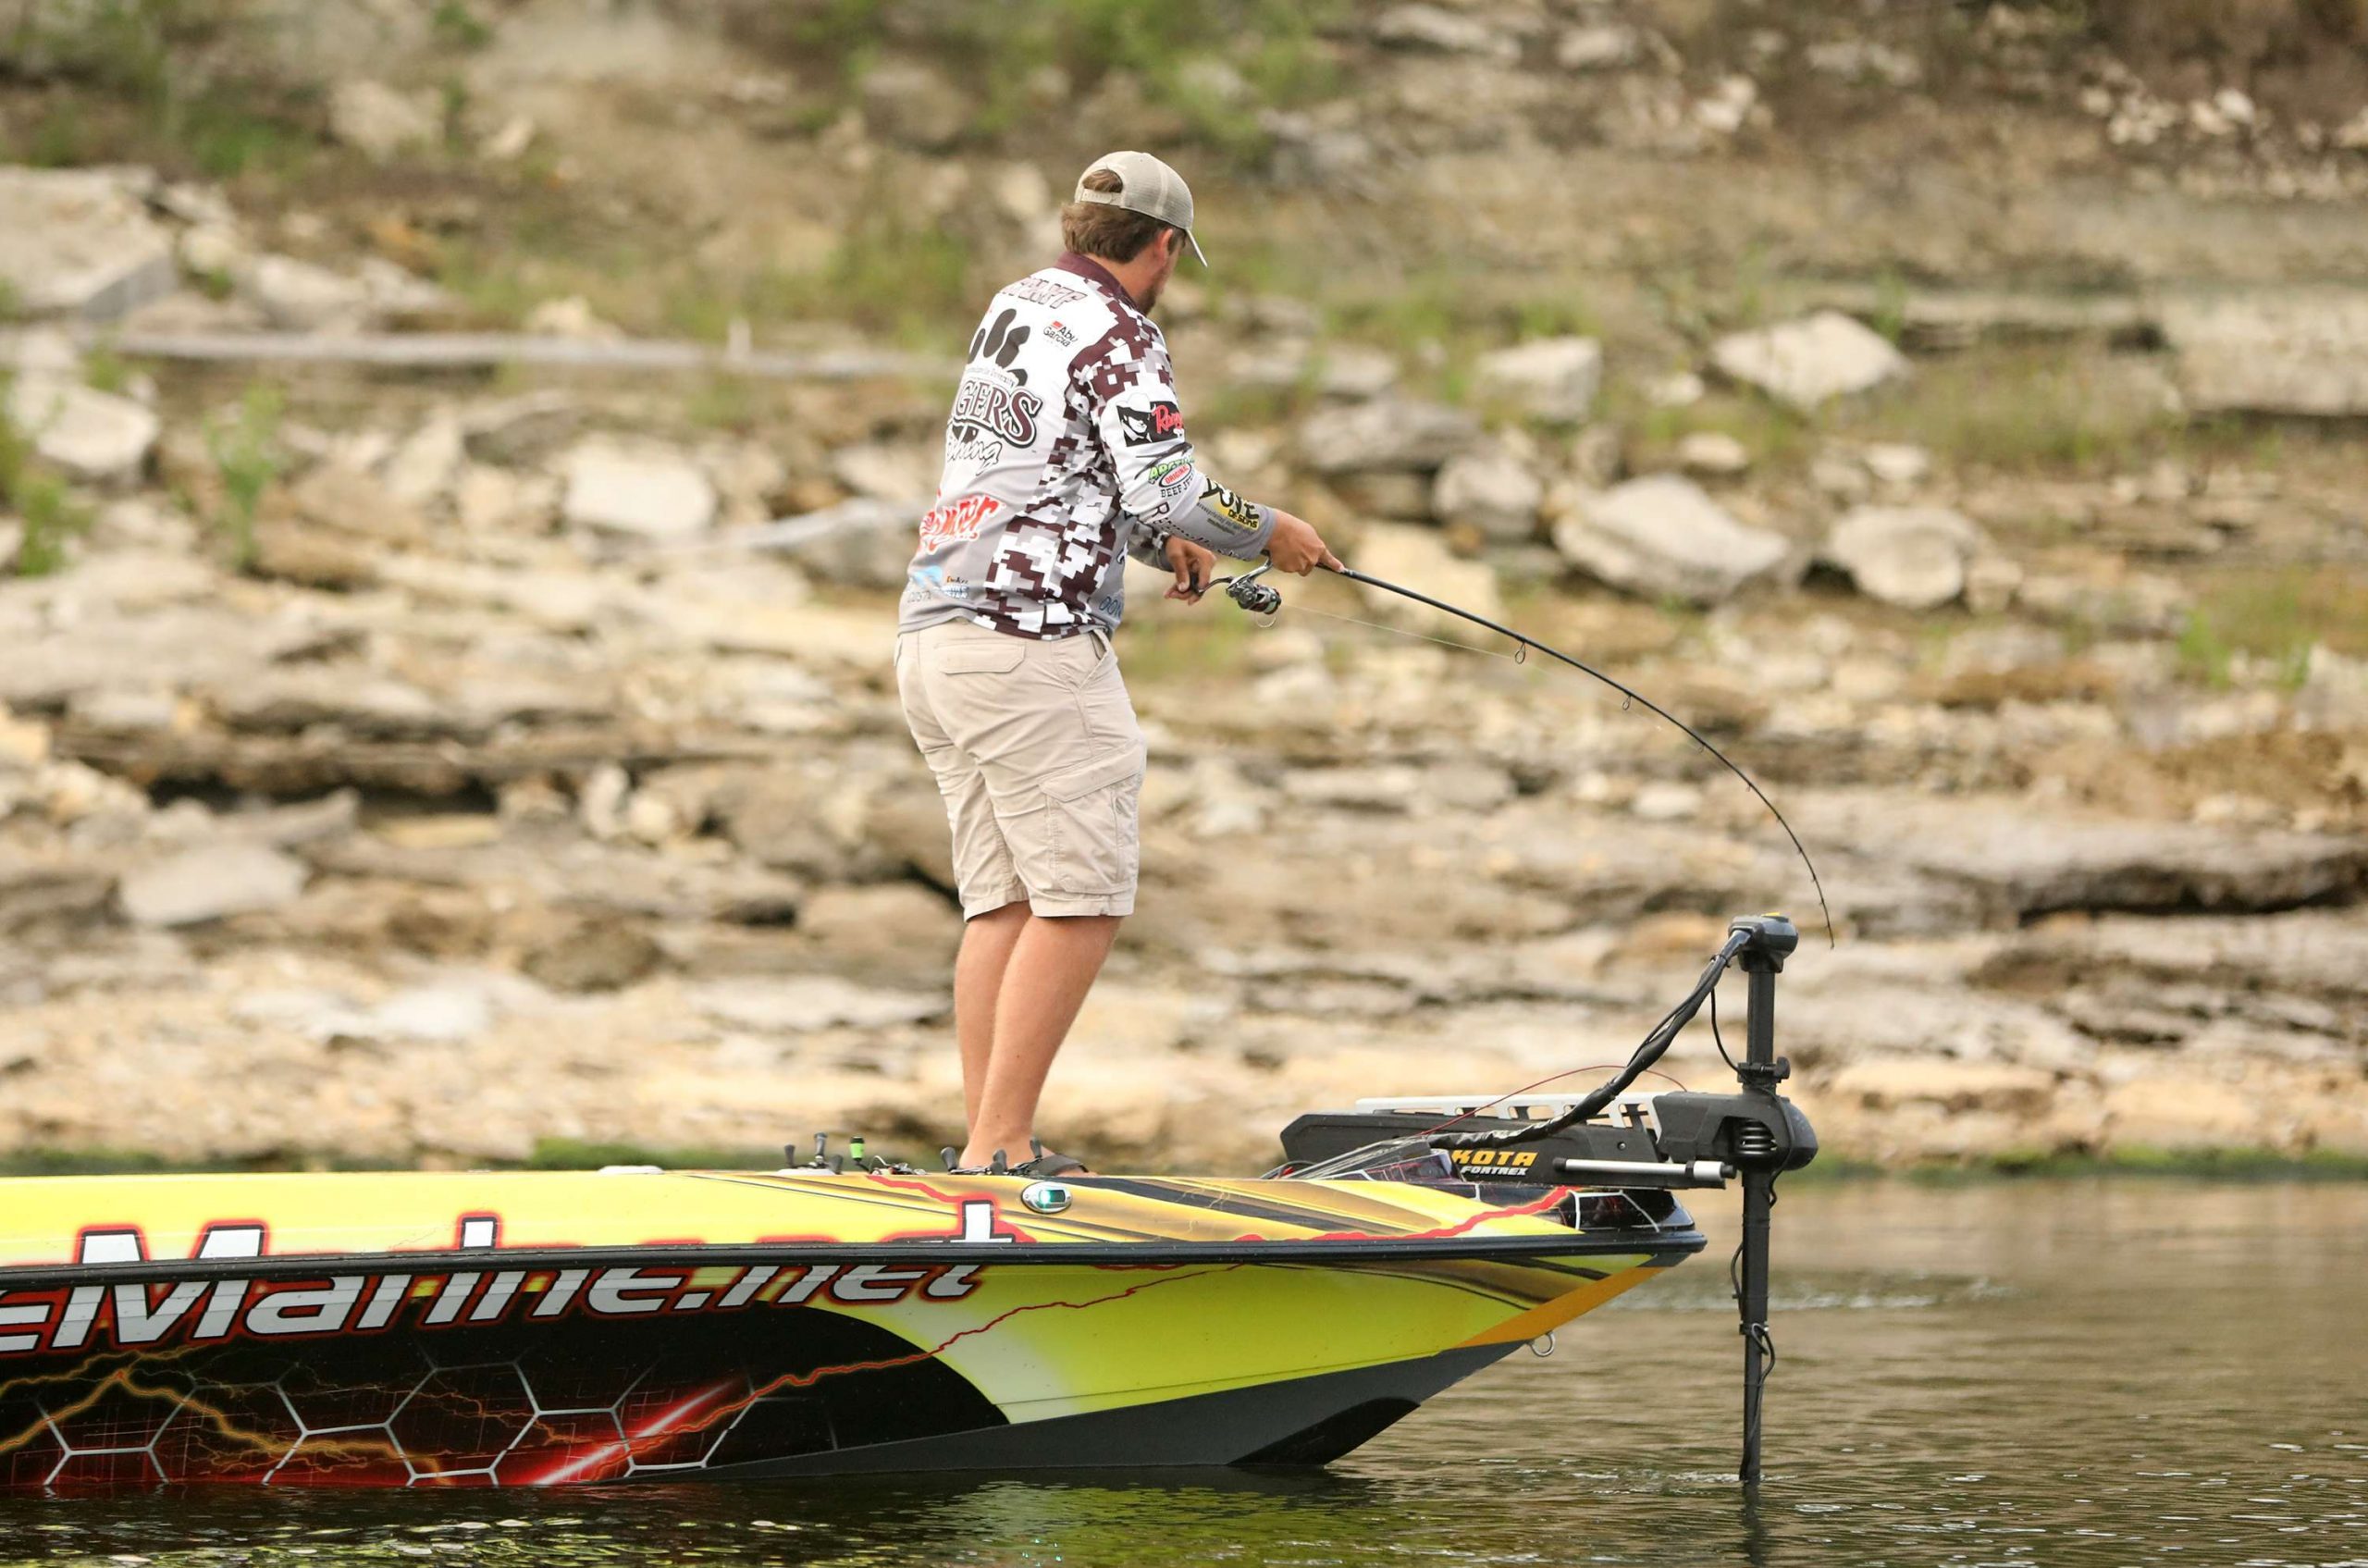 <b>Nick Ratliff (175-1)</b><br>
Elizabethtown, Ky. <br>
Nick Ratliff won the 2018 Carhartt Bassmaster College Series Classic Bracket presented by Bass Pro Shops to get here. College qualifiers have enjoyed mixed results through the years, but Ratliff, a youngster from Campbellsville, Ky., has absolutely nothing to lose. He should fish that way.
